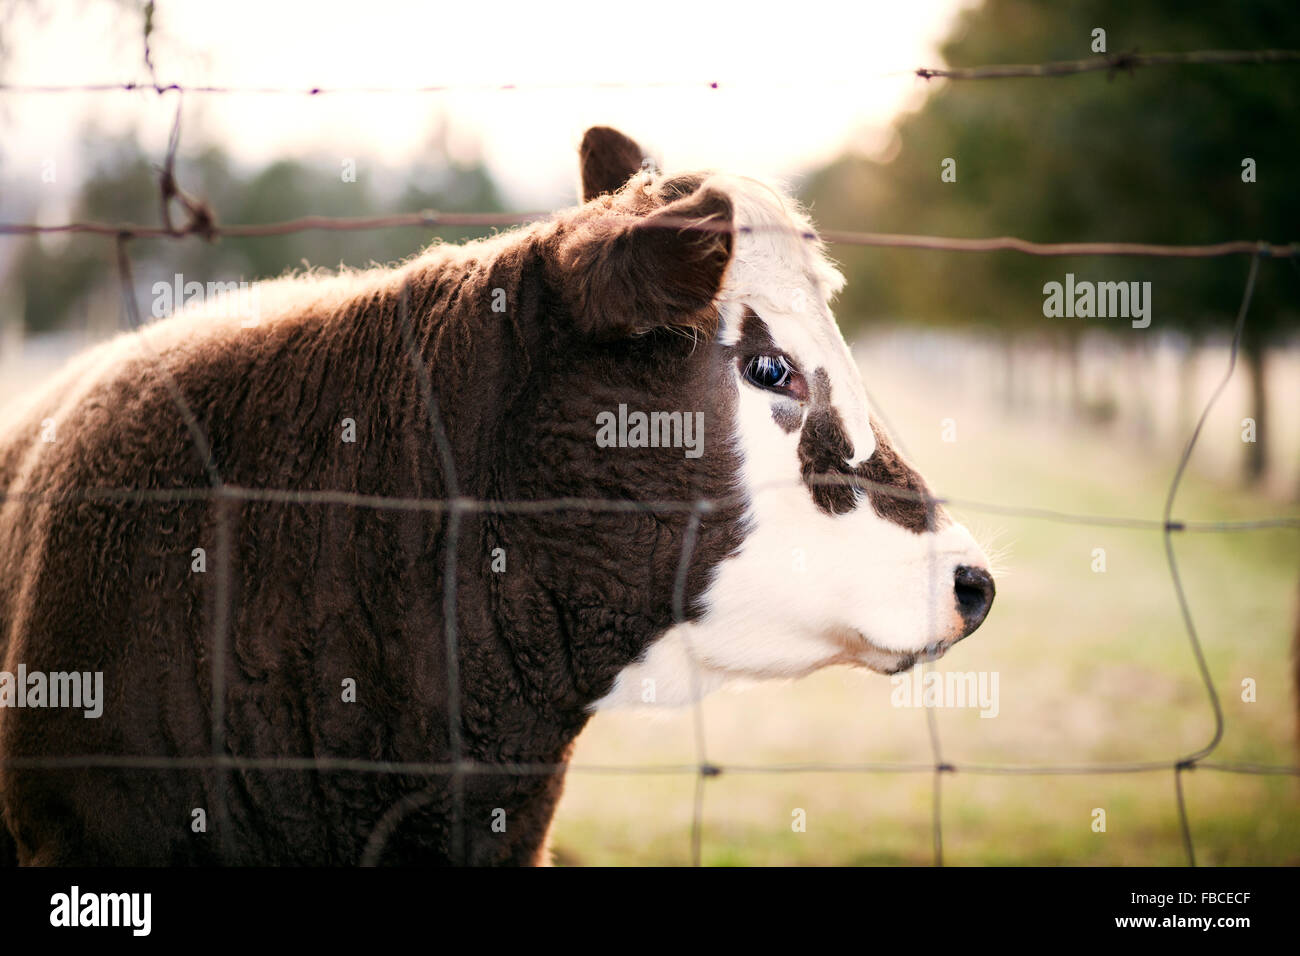 Profile of brown and white cow through a wire fence looking back towards viewer Stock Photo